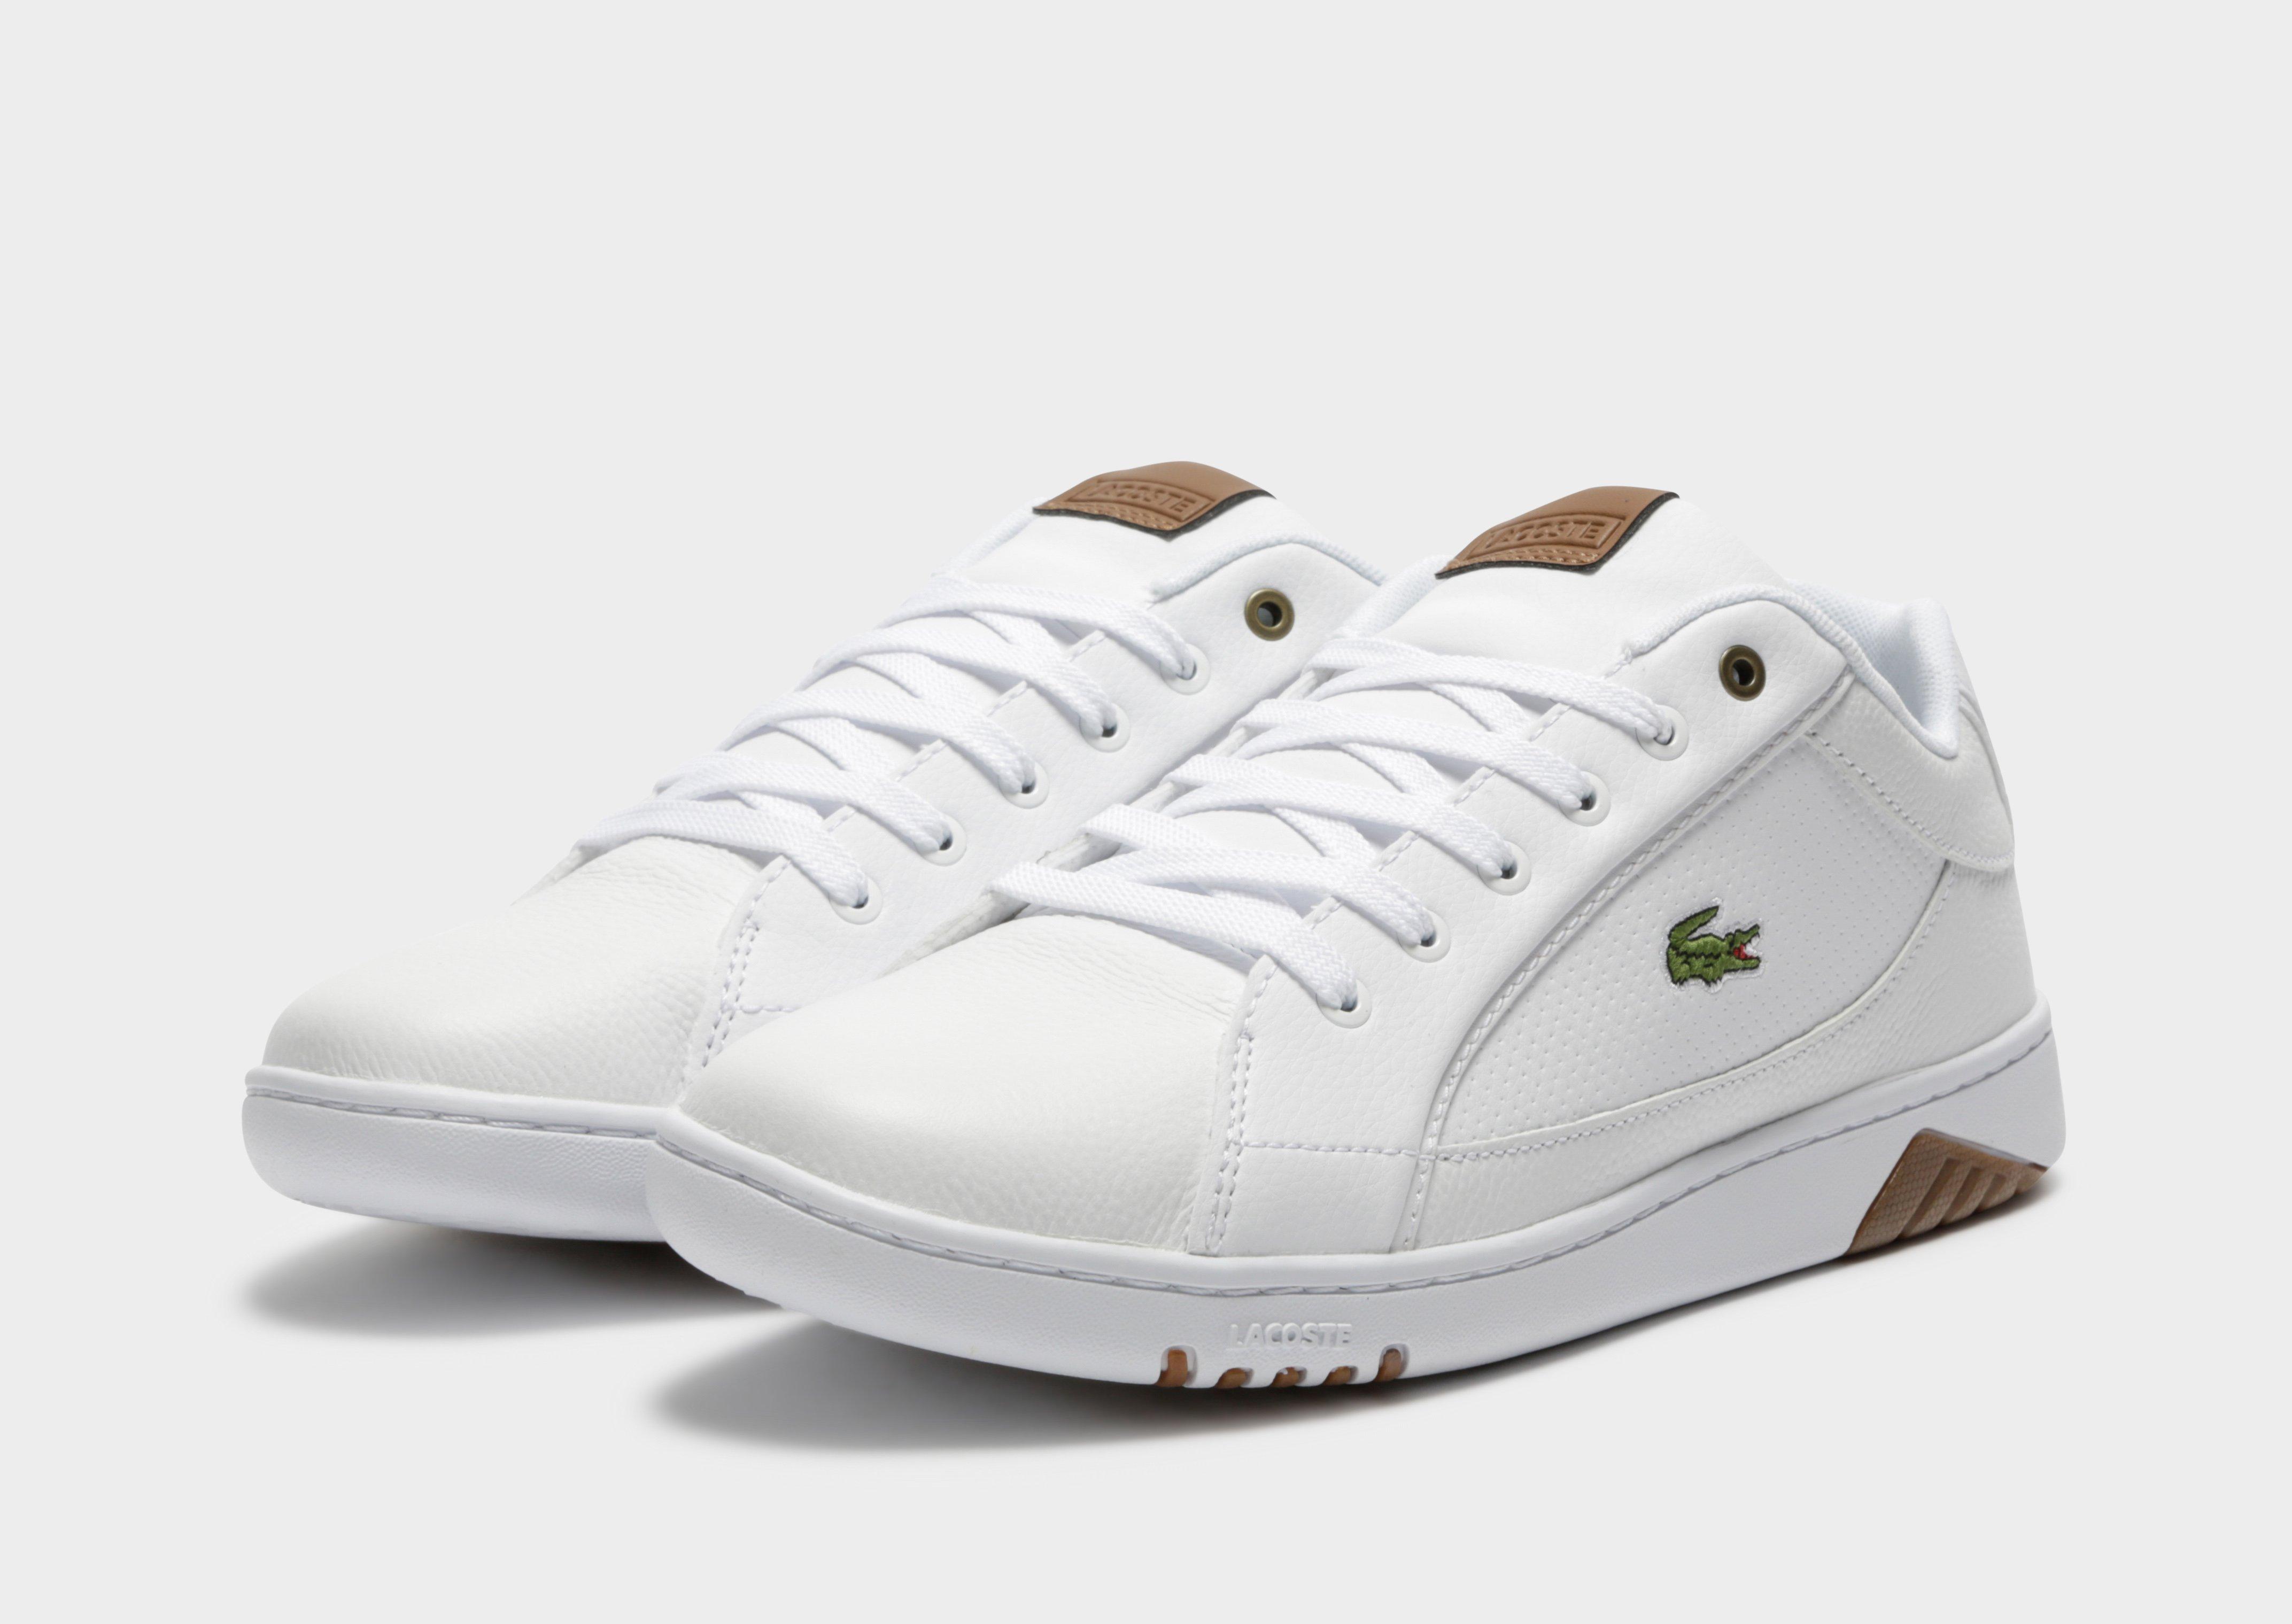 jd lacoste junior trainers